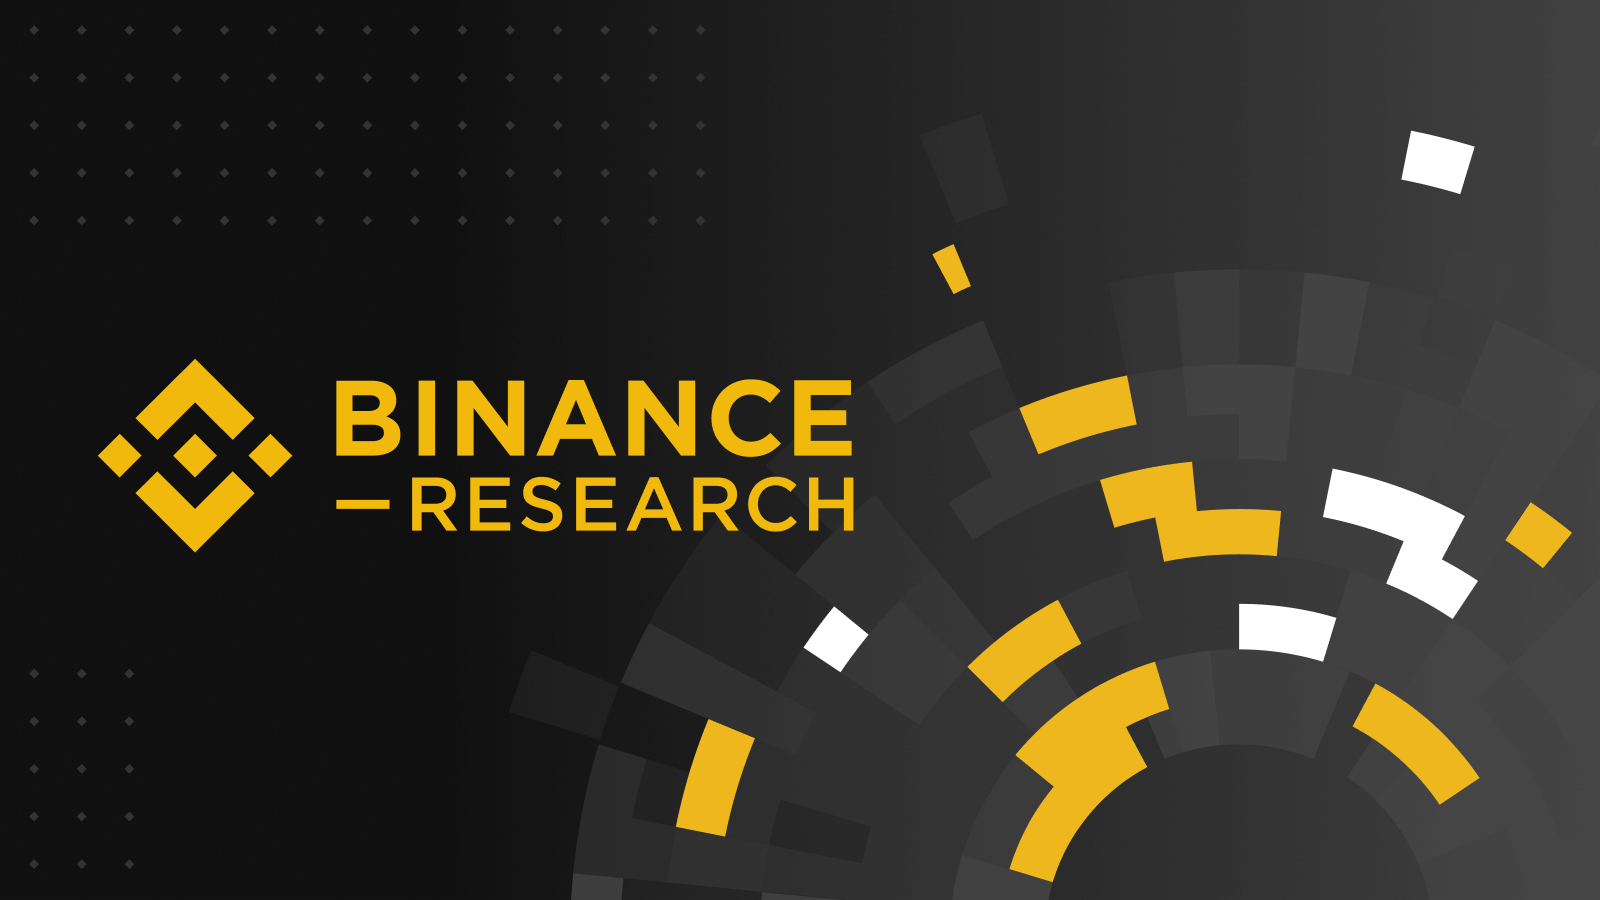 Digital Assets and Cryptocurrencies | Blockchain Research | Crypto Analysis  | Binance Research